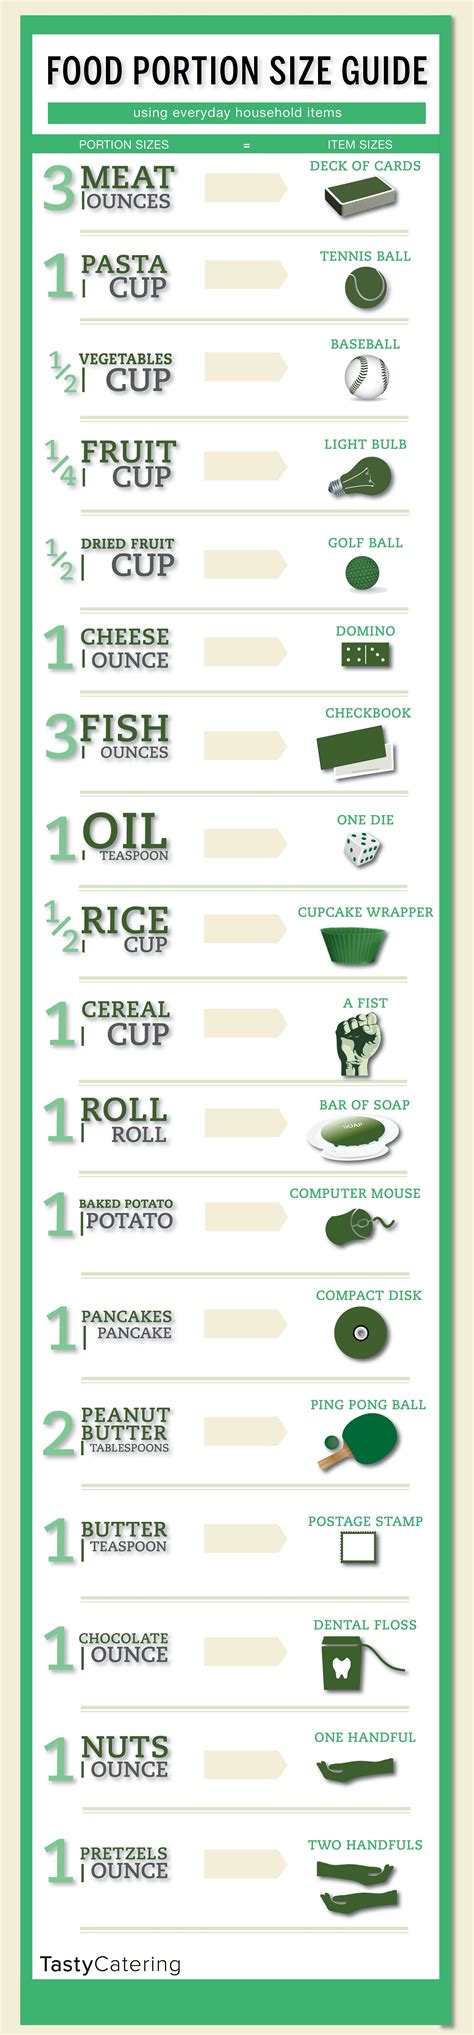 Food Serving Size Printable Portion Sizes Chart